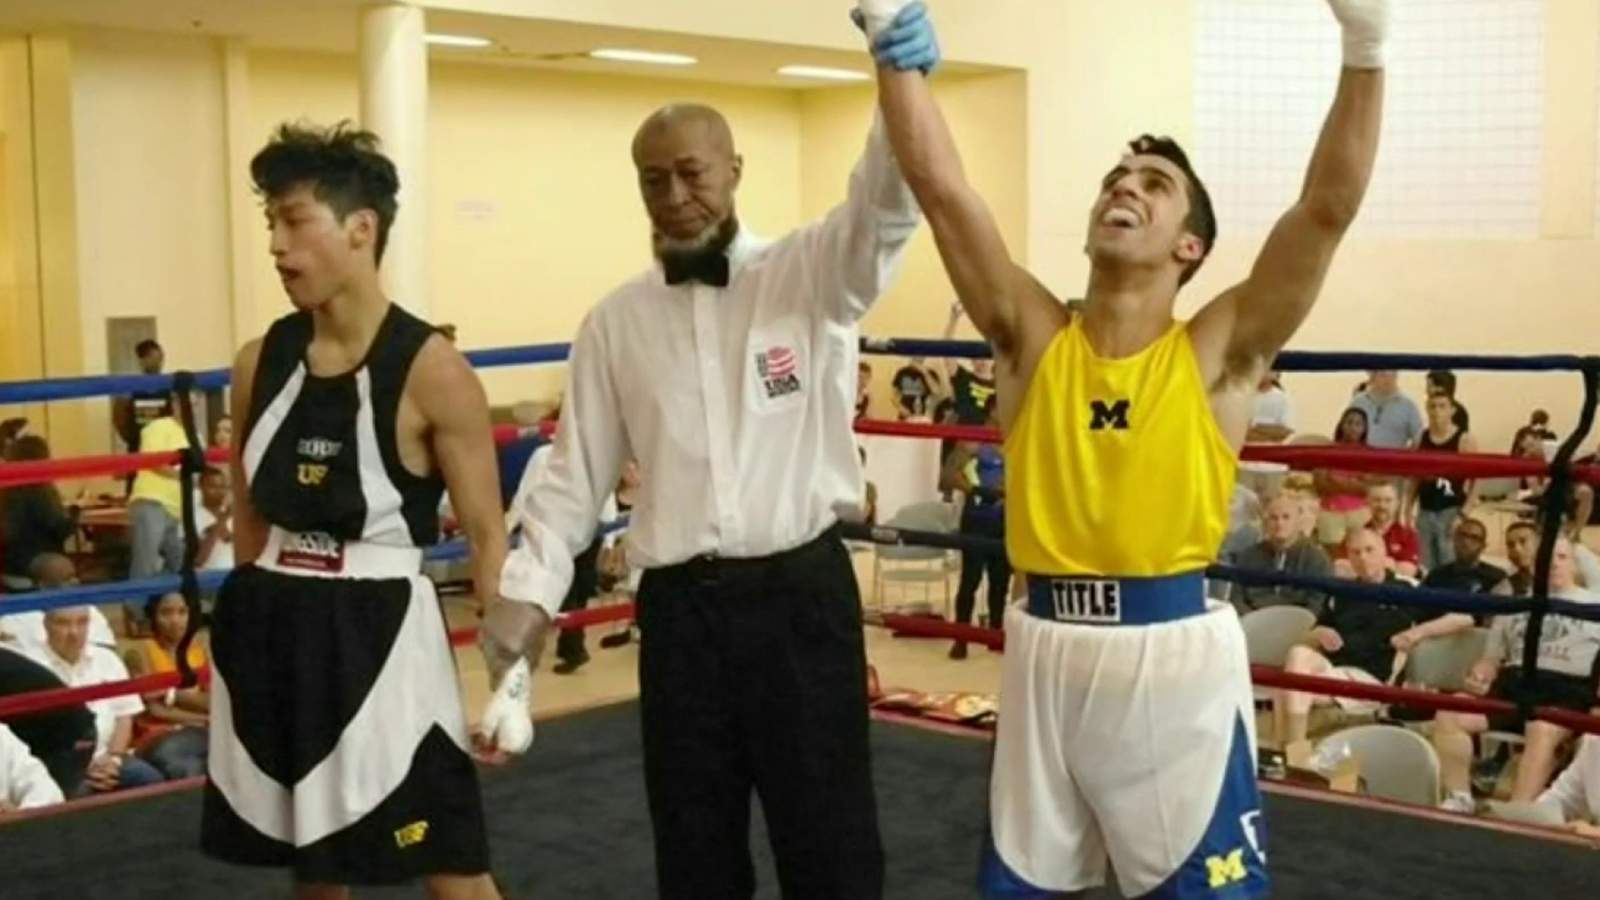 University of Michigan Boxing Club fights to survive after university pulls sponsorship